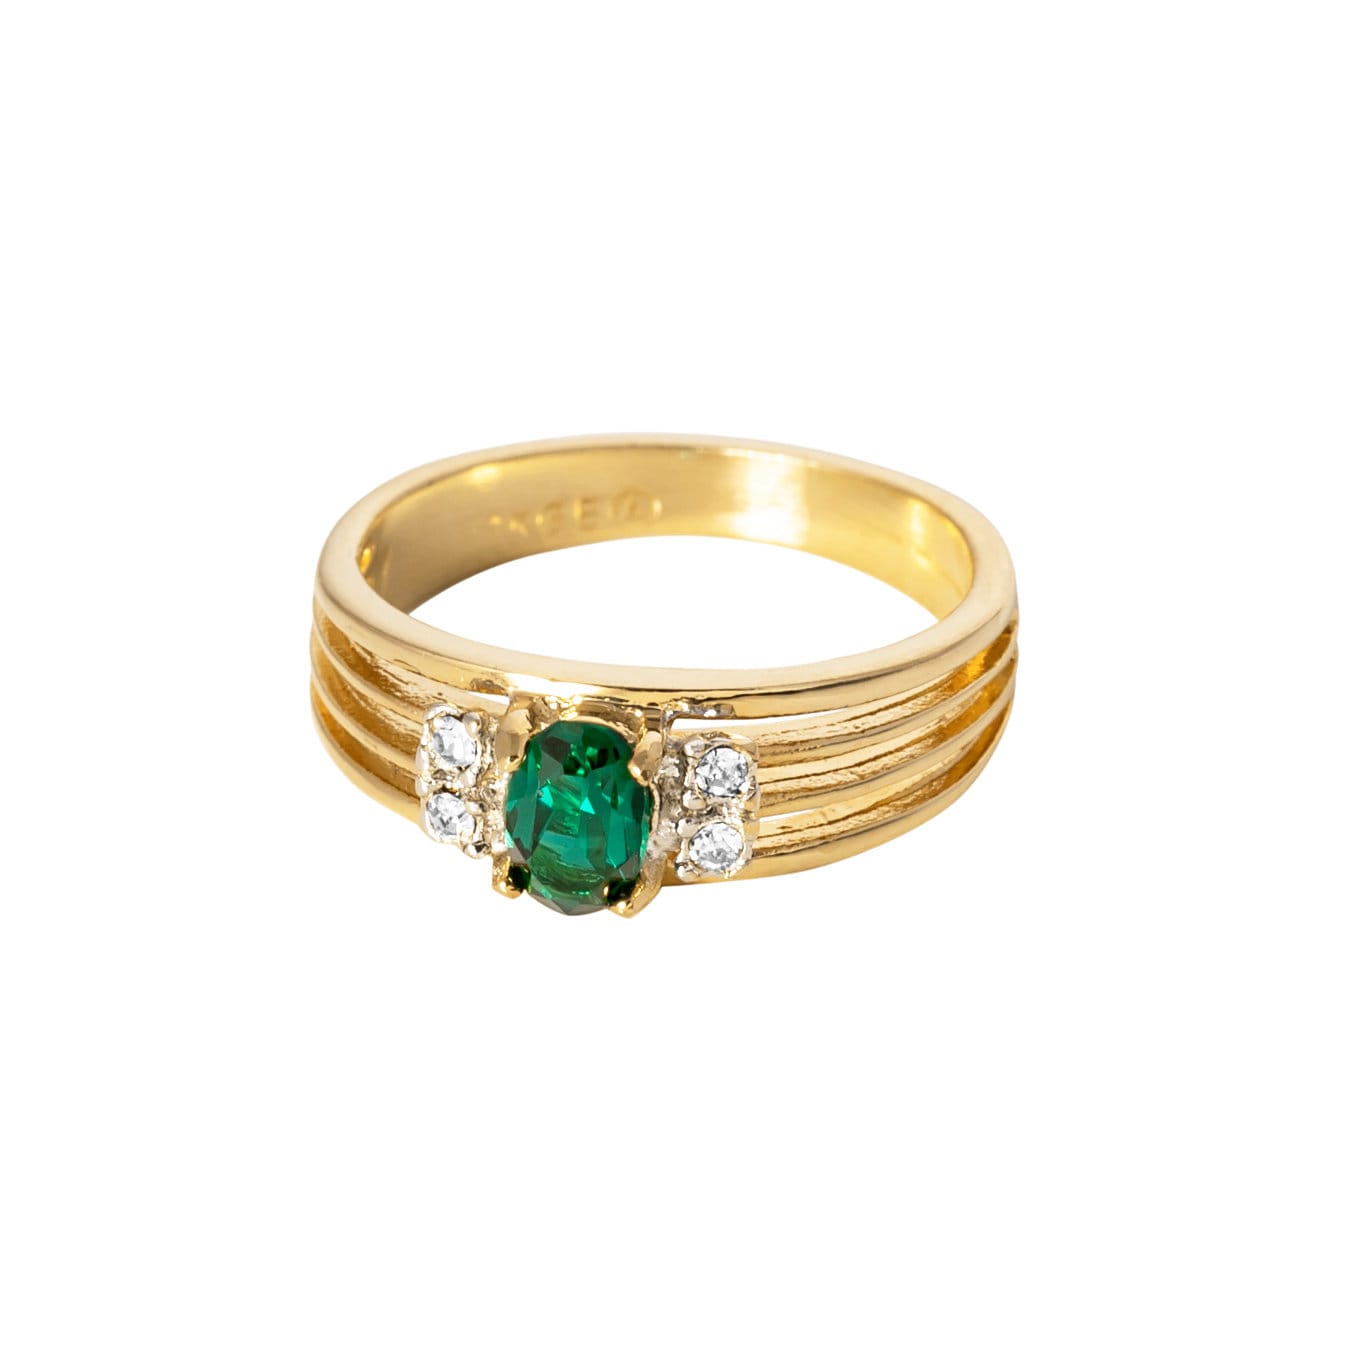 Vintage Ring Emerald and Clear Swarovski Crystals 18k Gold Band #R1318 Antique Womans Jewlery Handmade Size - Limited Stock - Never Worn